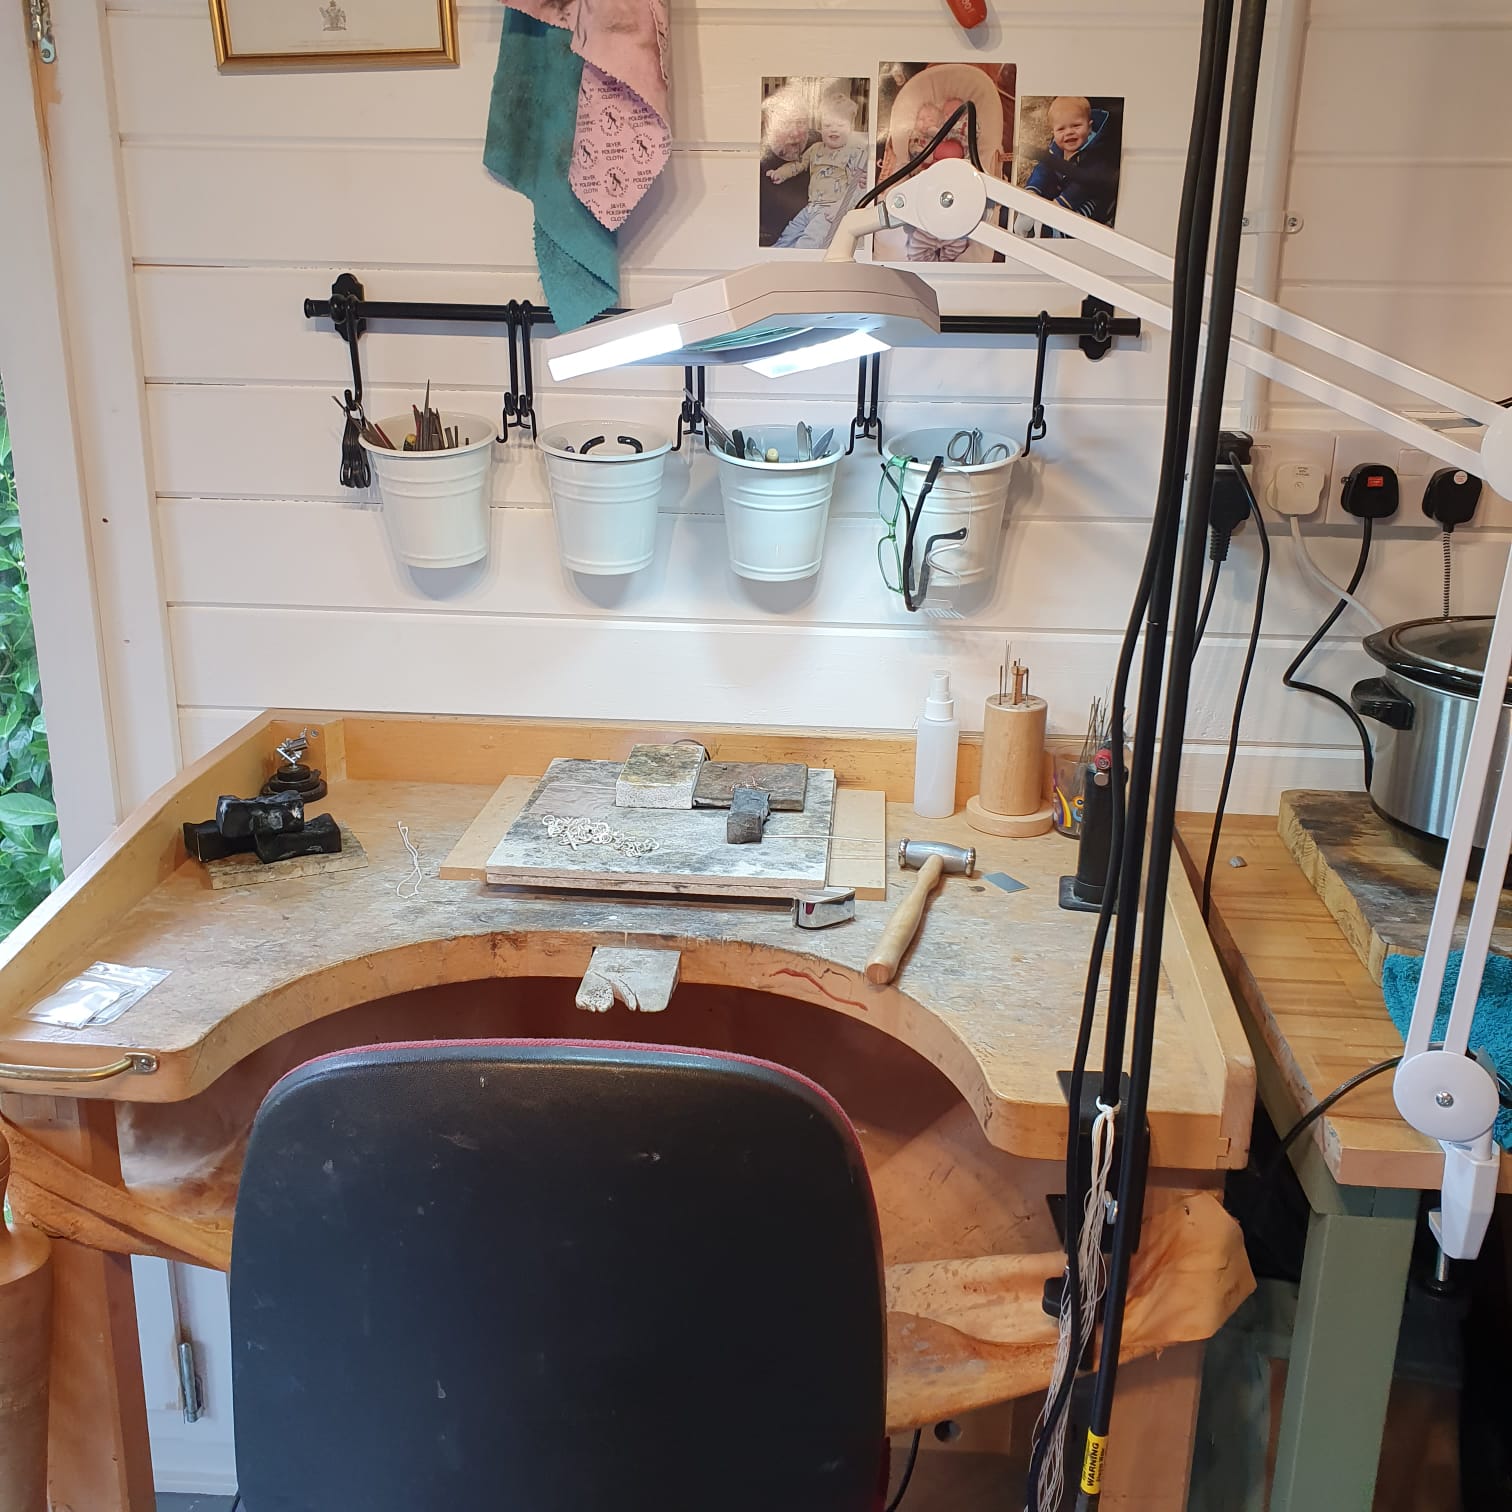 Choosing a jeweller's saw for you jewellery making toolkit — Jewellers  Academy